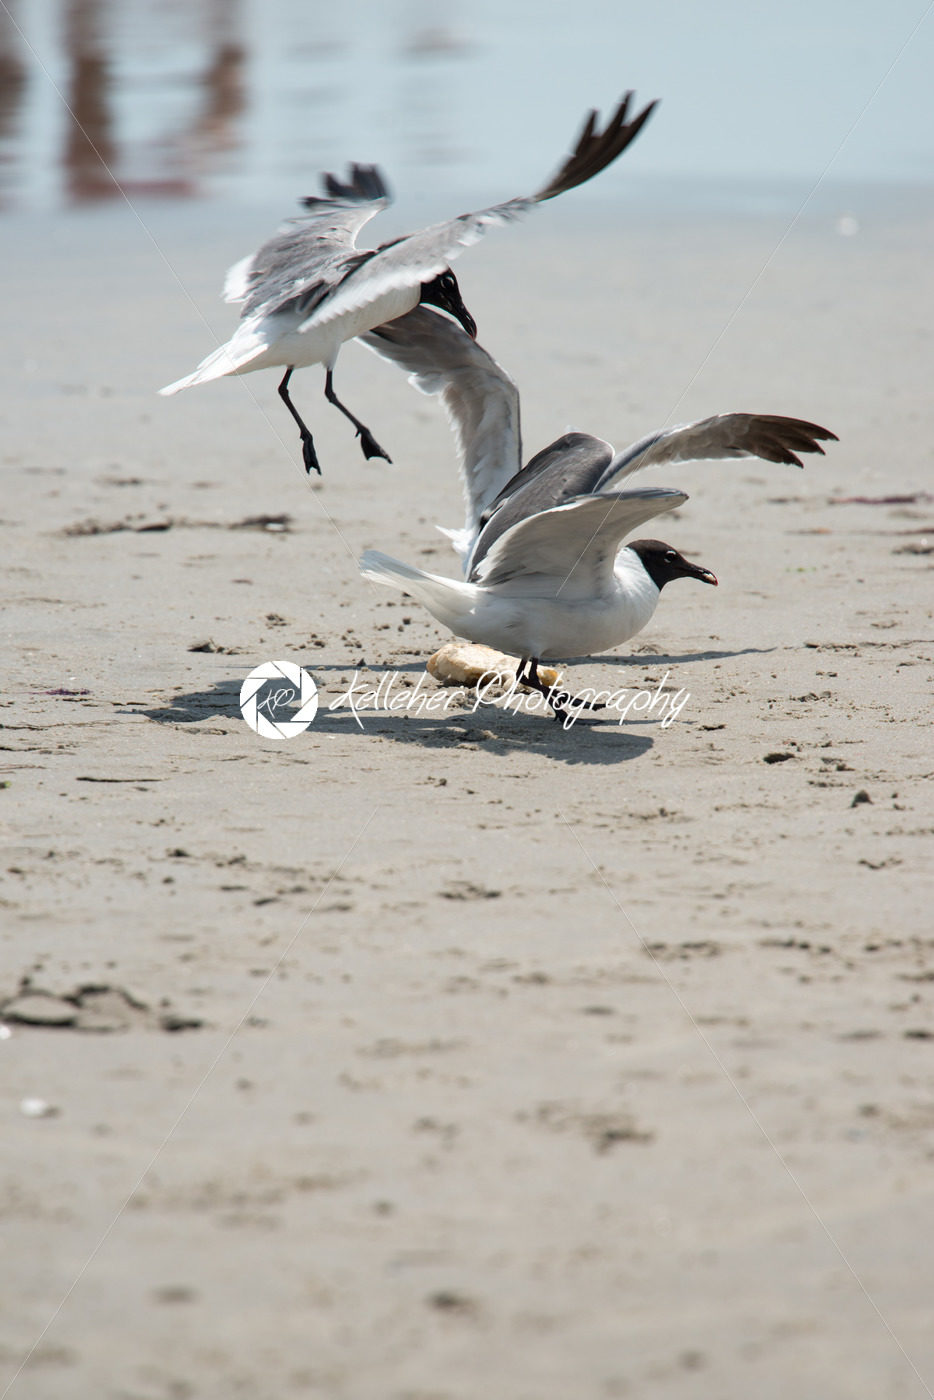 Seagull on the beach flying fighting over food - Kelleher Photography Store